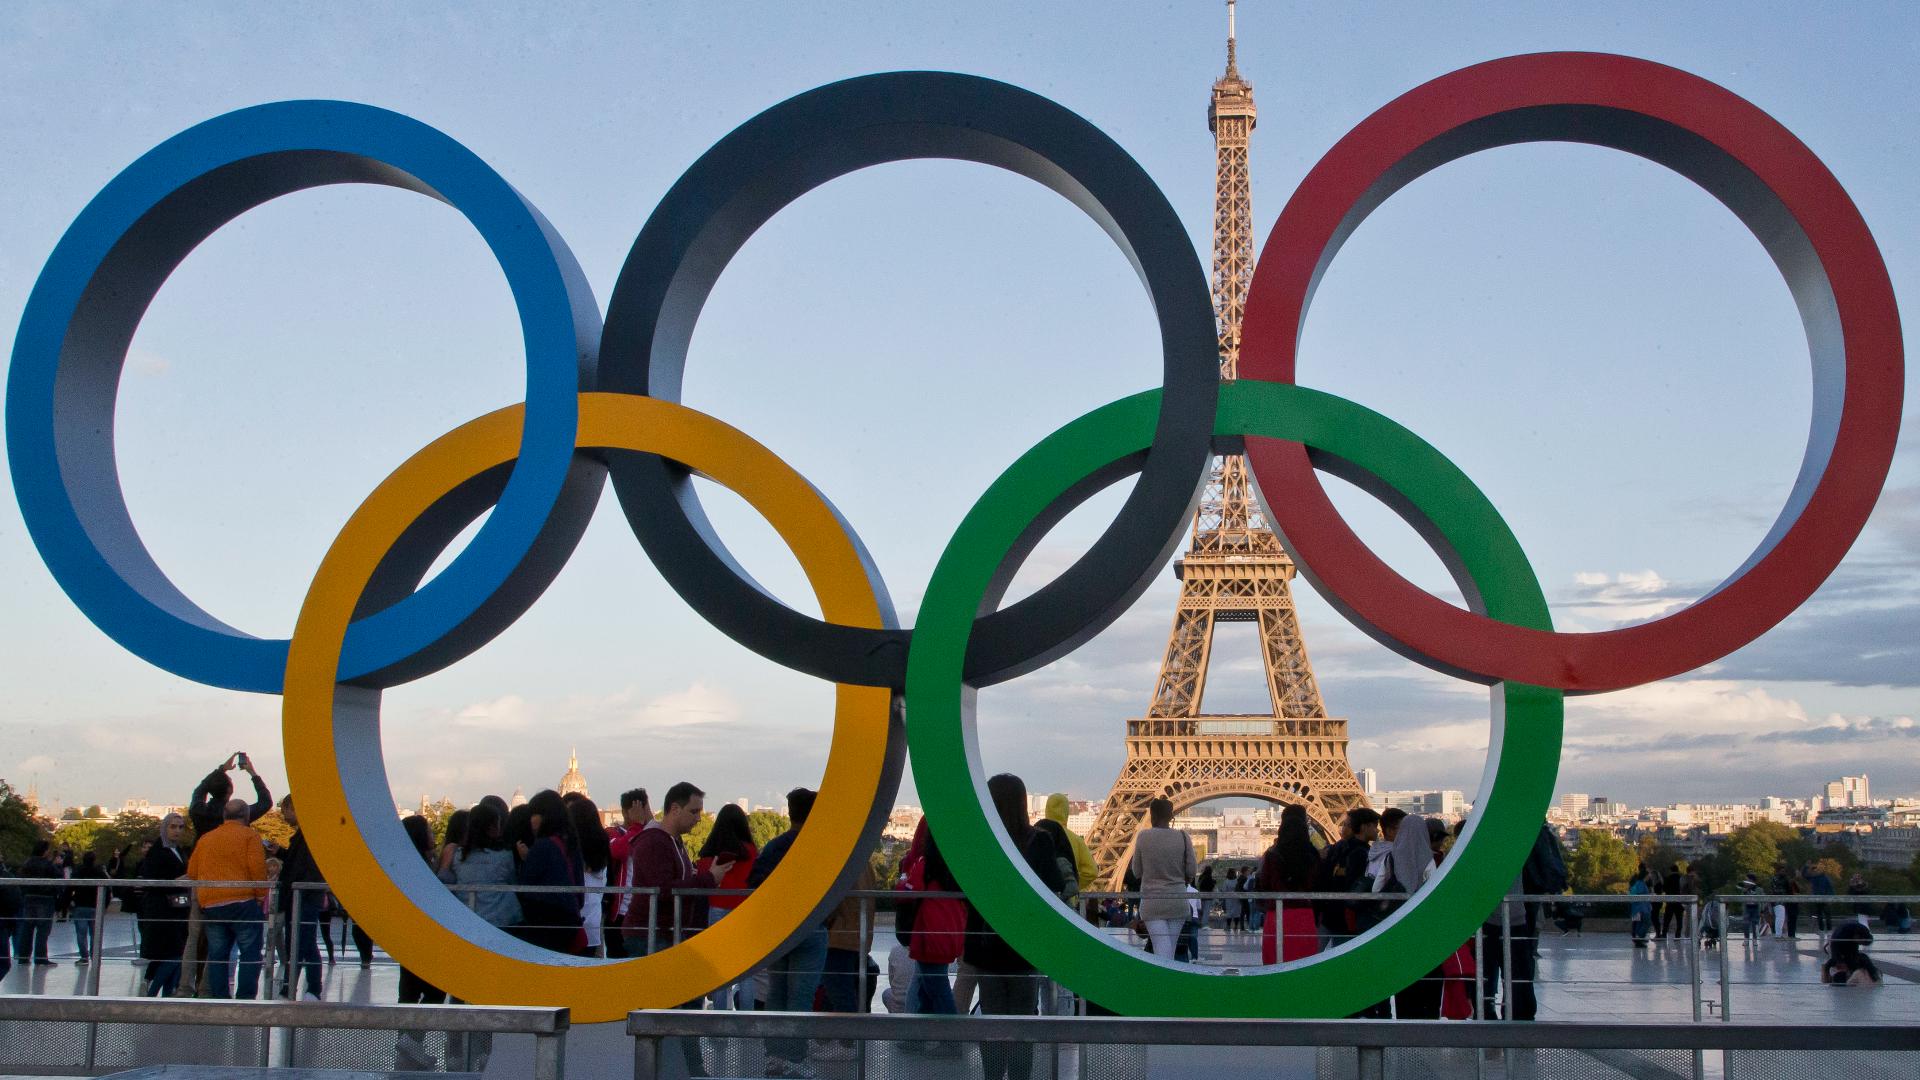 Paris Olympic officials have set an ambitious target of halving their overall carbon footprint compared with the 2012 London and 2016 Rio Games.